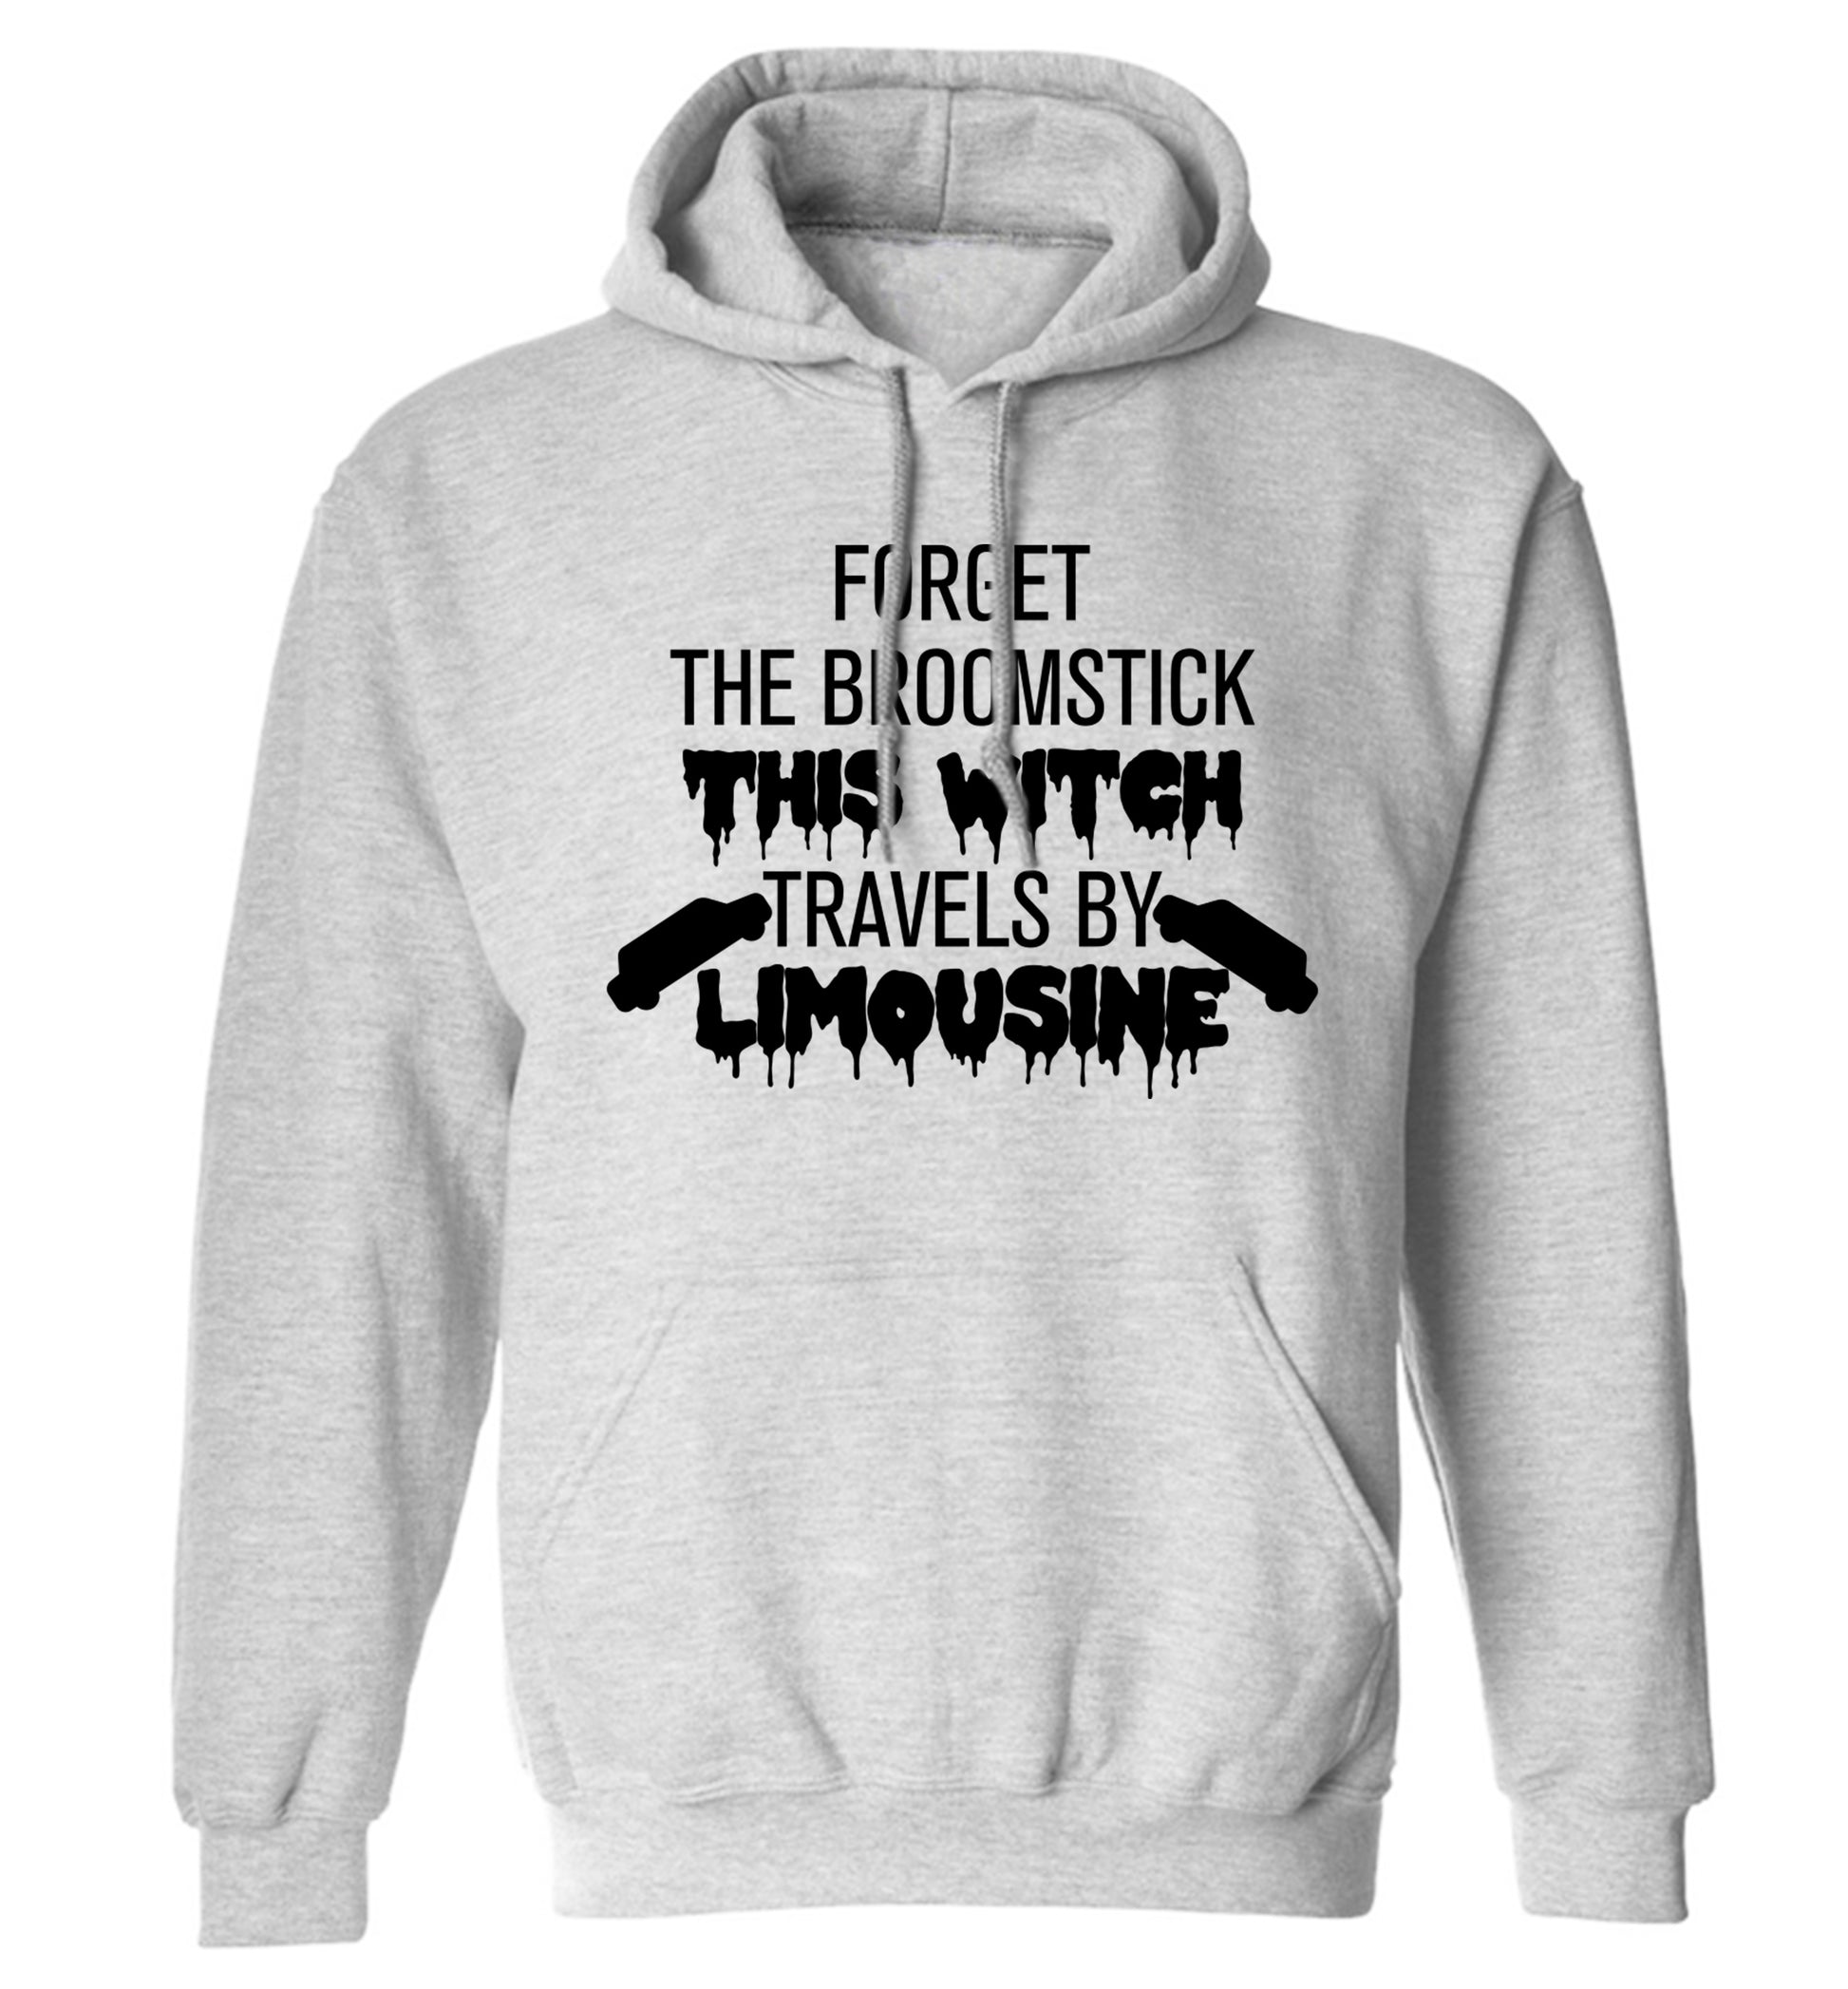 Forget the broomstick this witch travels by limousine adults unisexgrey hoodie 2XL